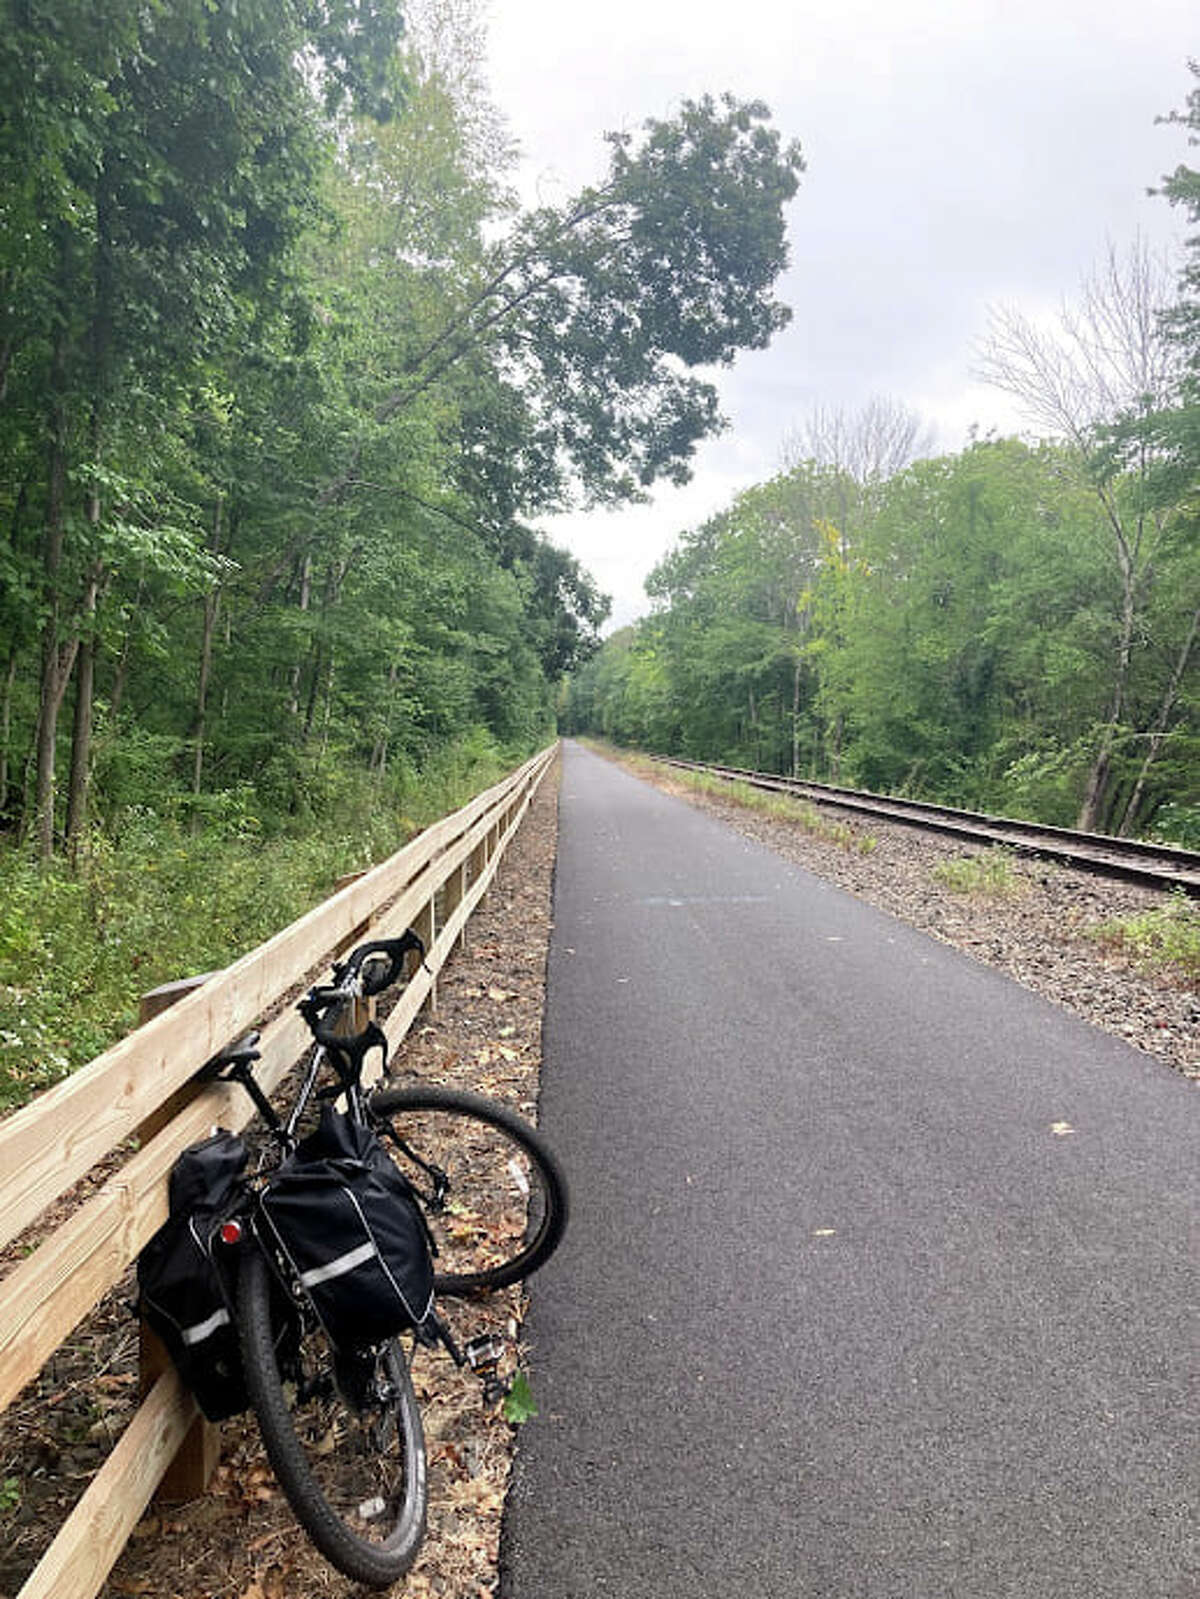 The Empire State Trail is 75 percent off-road.